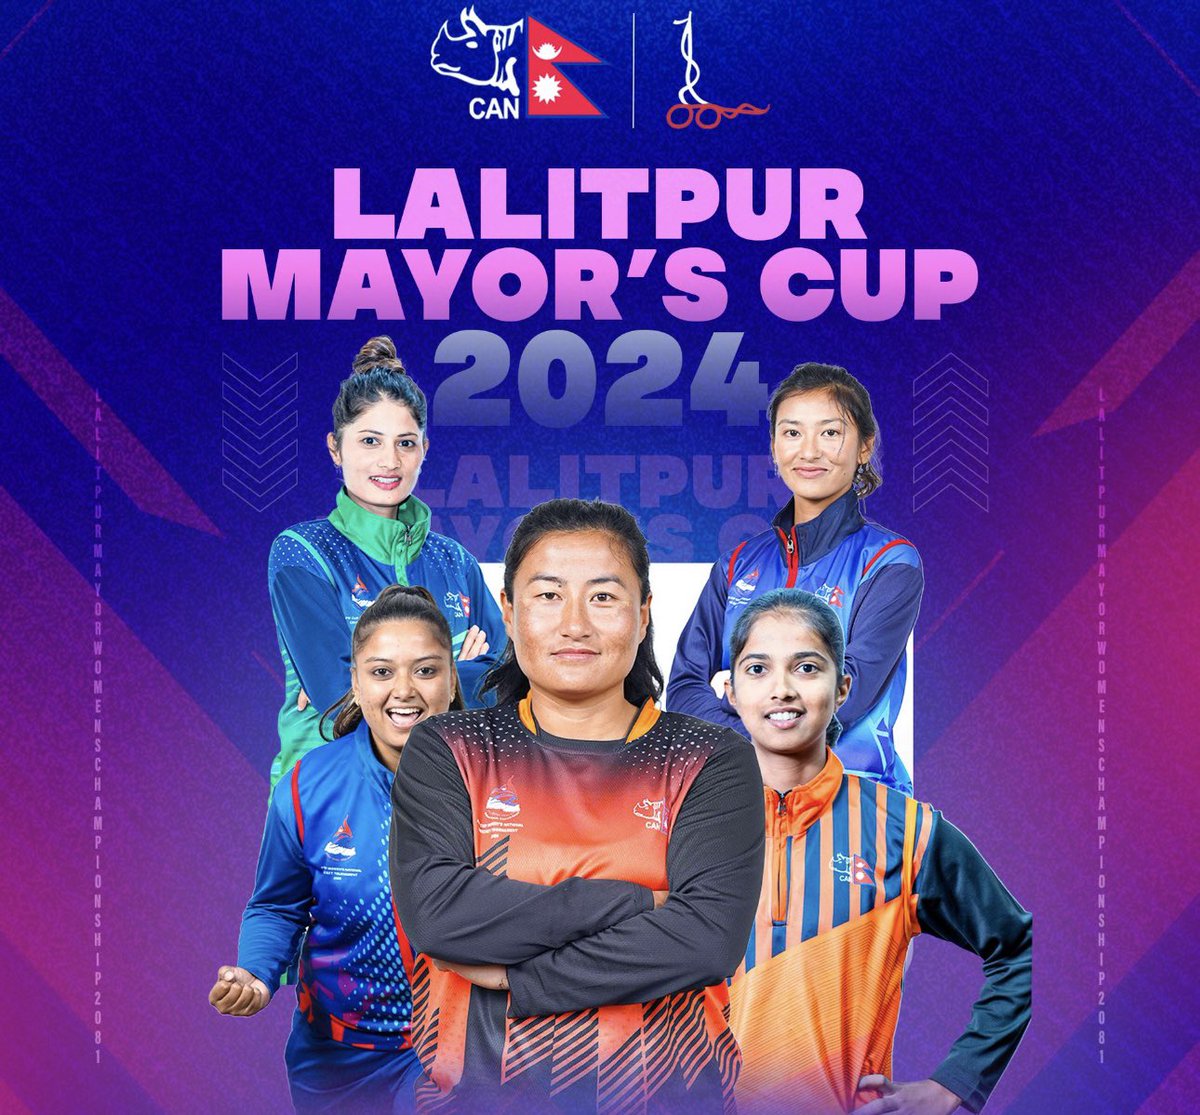 Let’s get ready 🔥
Lalitpur Mayor’s Cup 🇳🇵